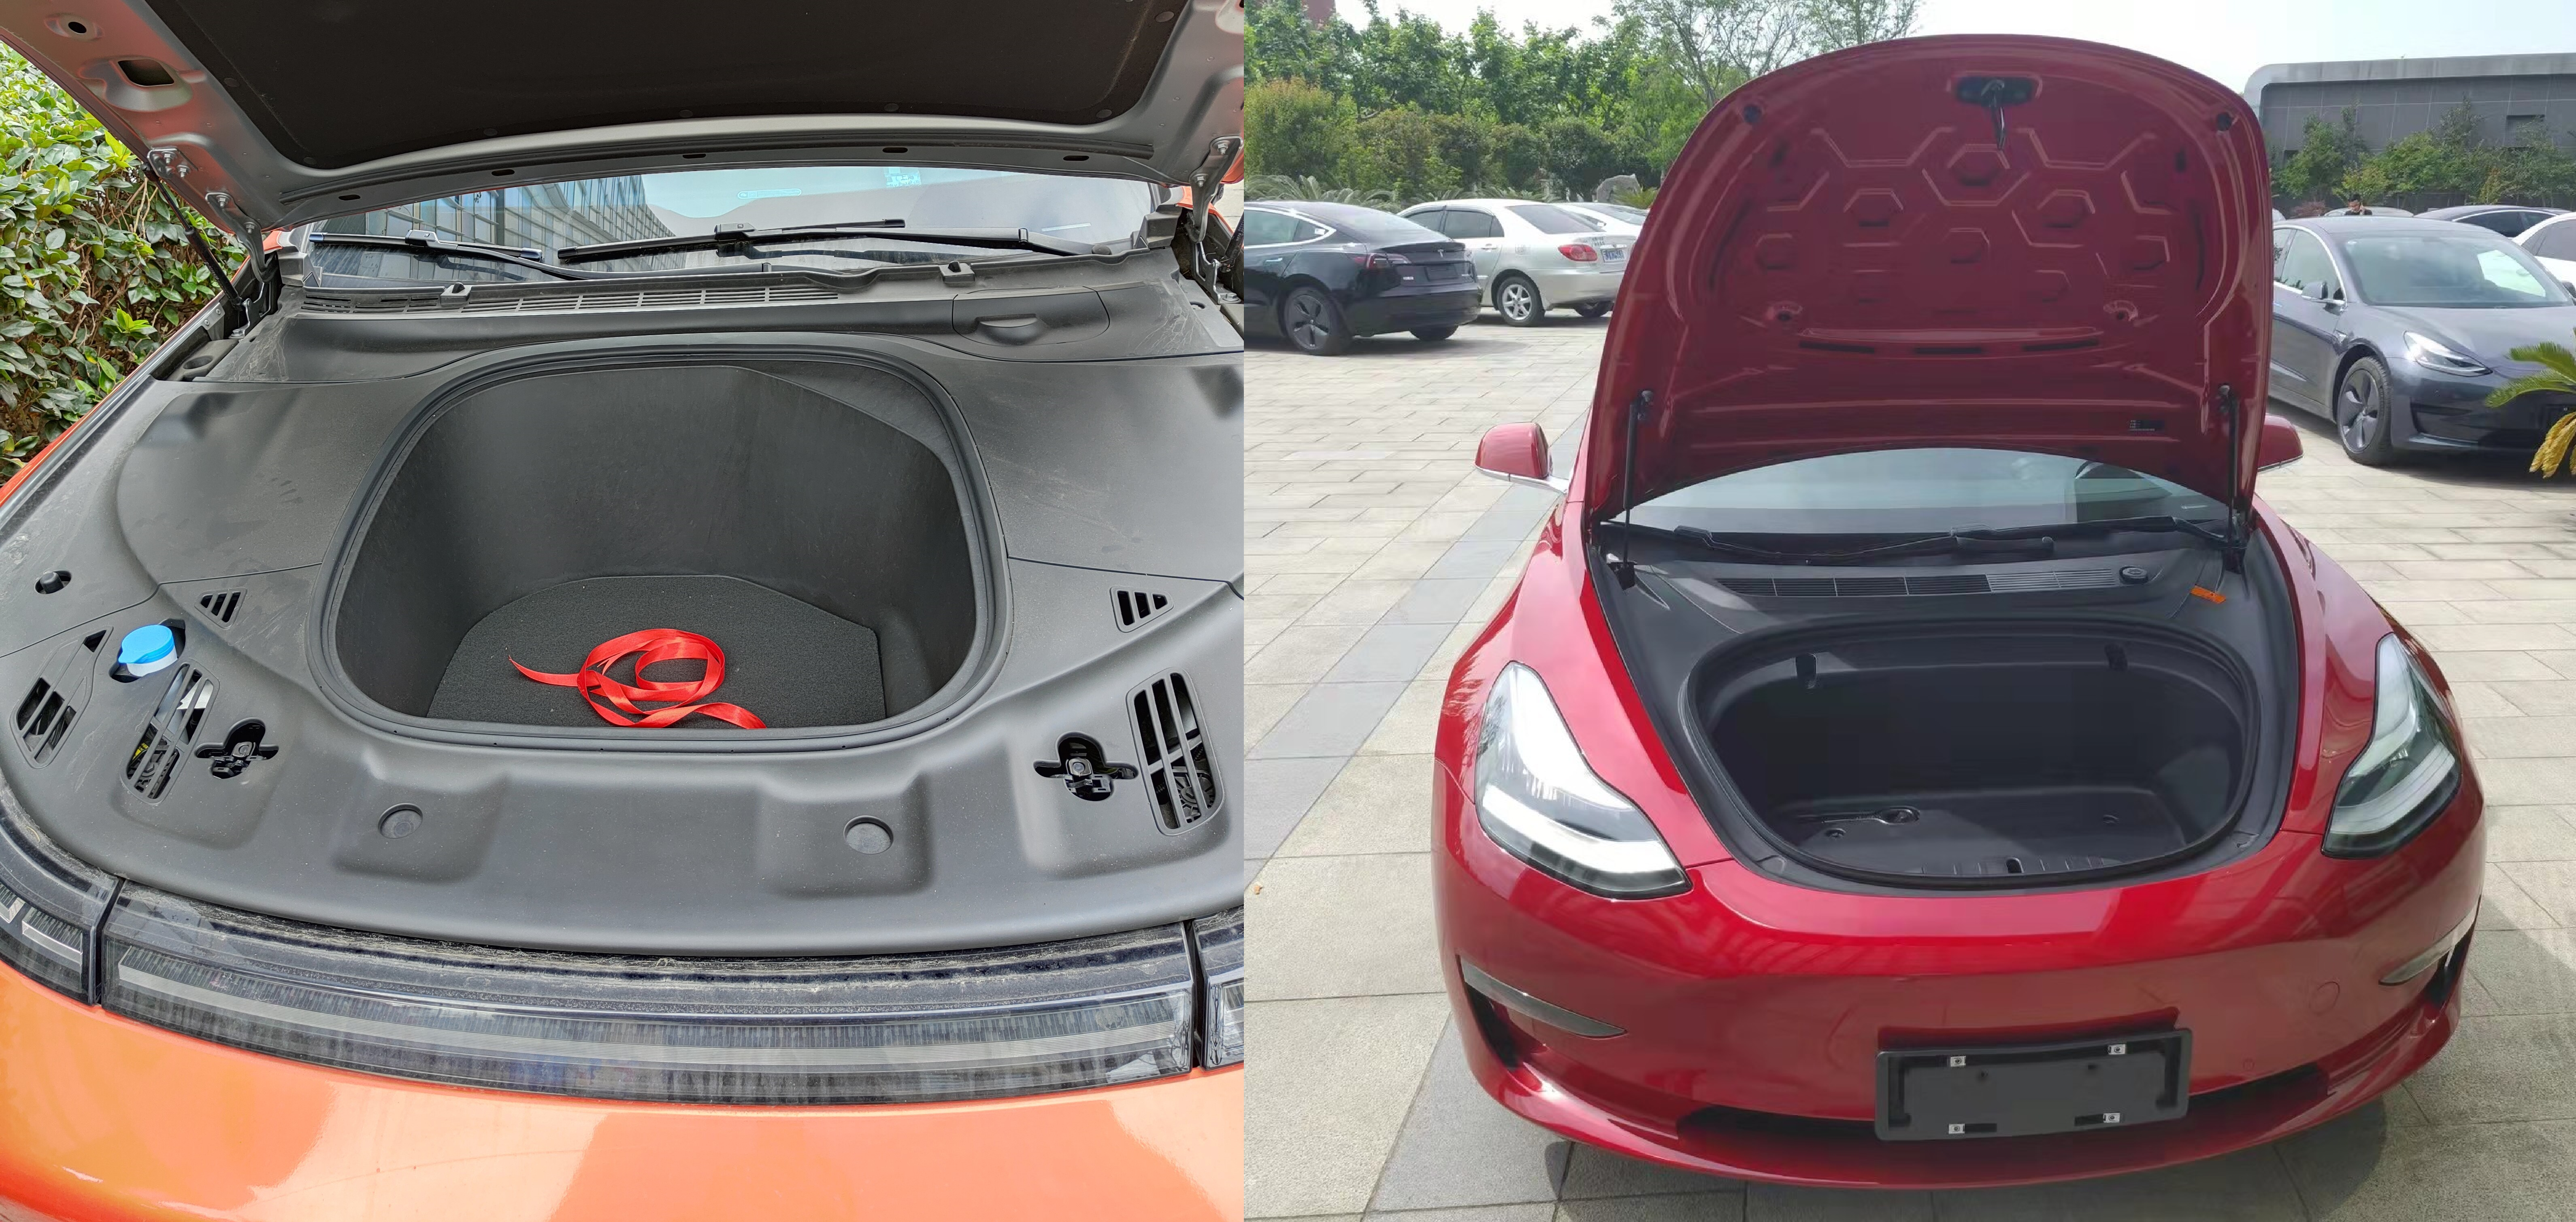 XPeng P7 (left) and Tesla Model 3 (right)